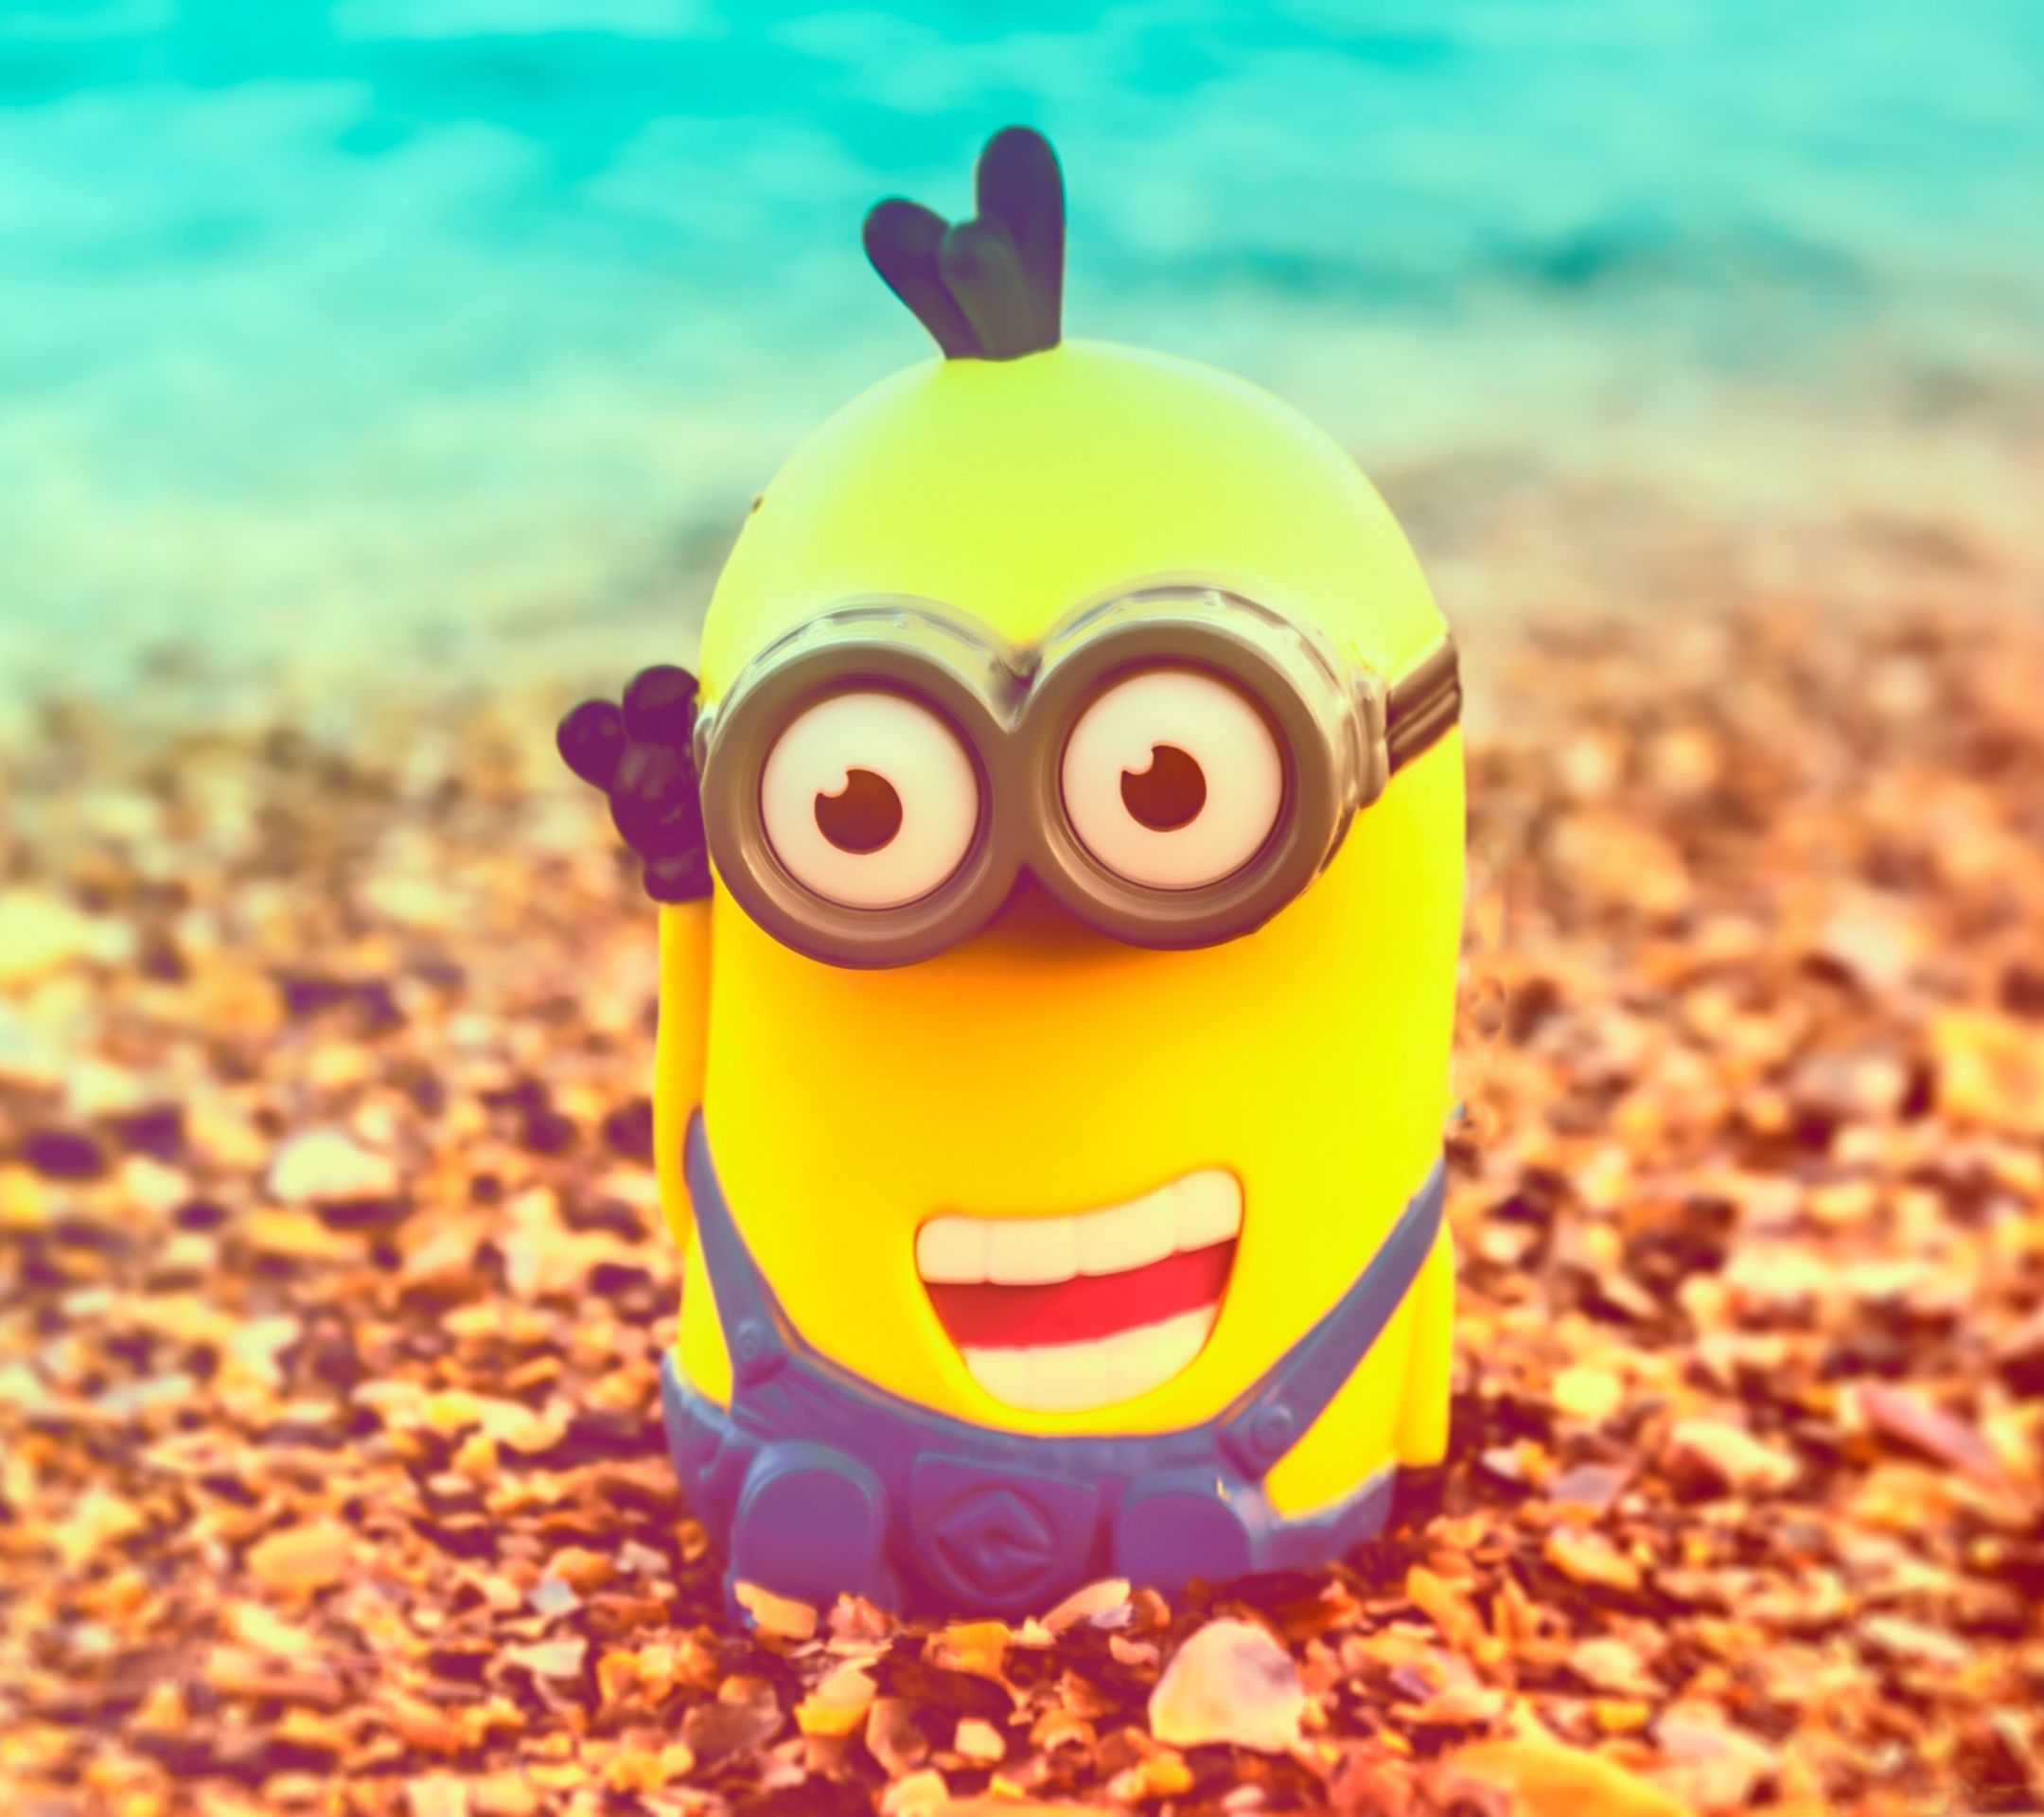 The MinionSamsung Wallpaper Download | Free Samsung Wallpapers ...